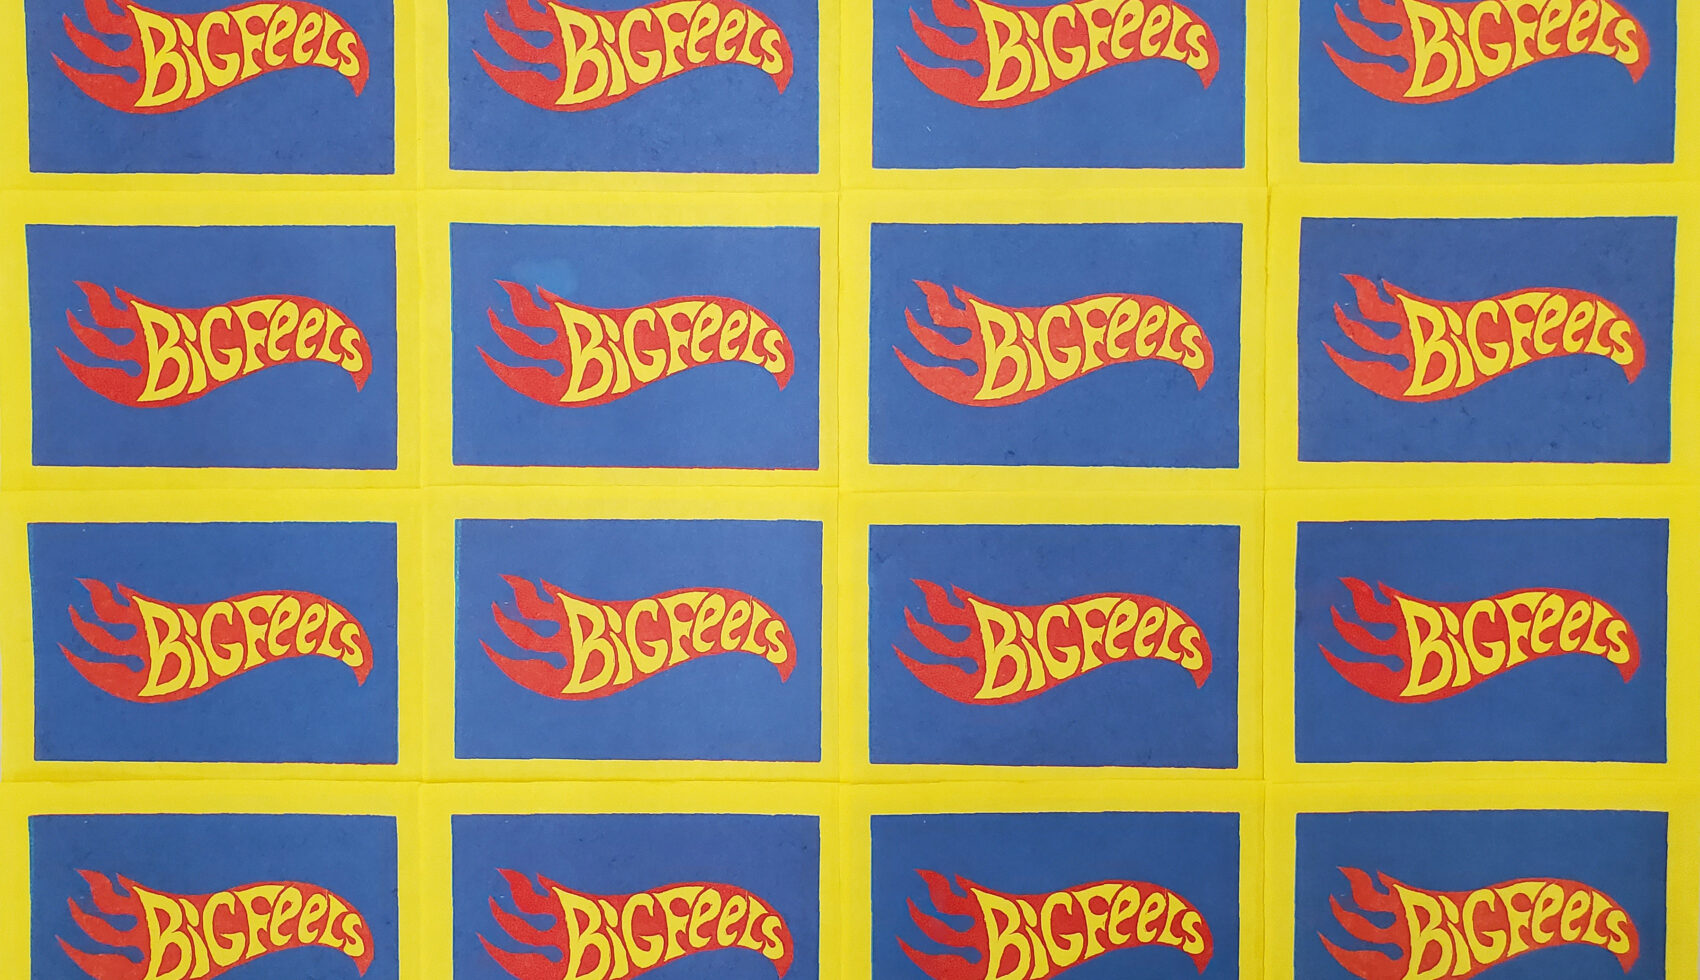 This image depicts a grid of identical prints on yellow paper. Each print features a blue rectangle containing a stylized red flame. The flame is emblazoned with yellow text that reads “Big Feels”. The overall design of the prints is strongly reminiscent of the Hot Wheels logo.